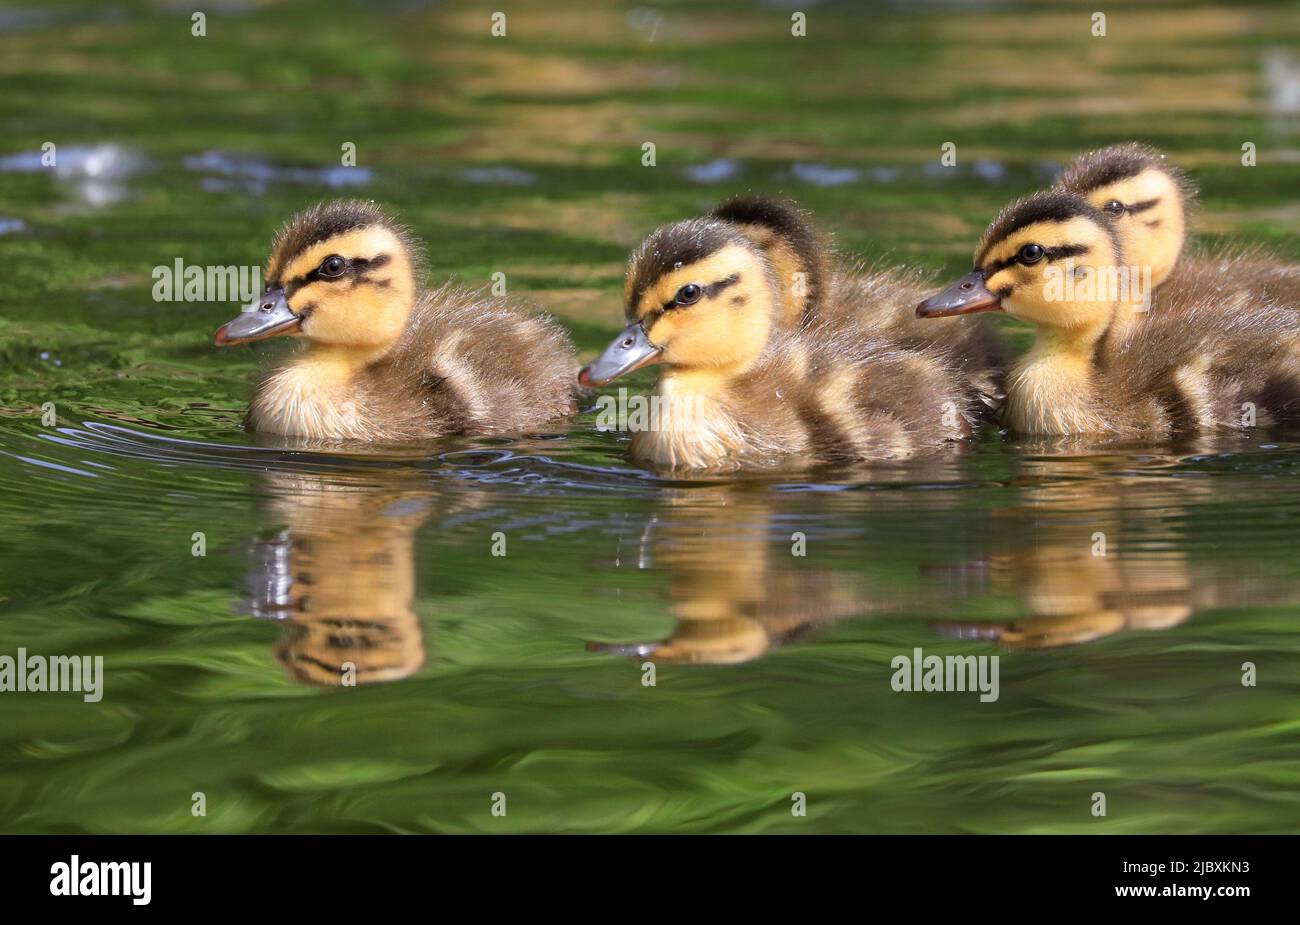 Babies Mallard duck swimming on the lake with nice reflections and green foreground Stock Photo